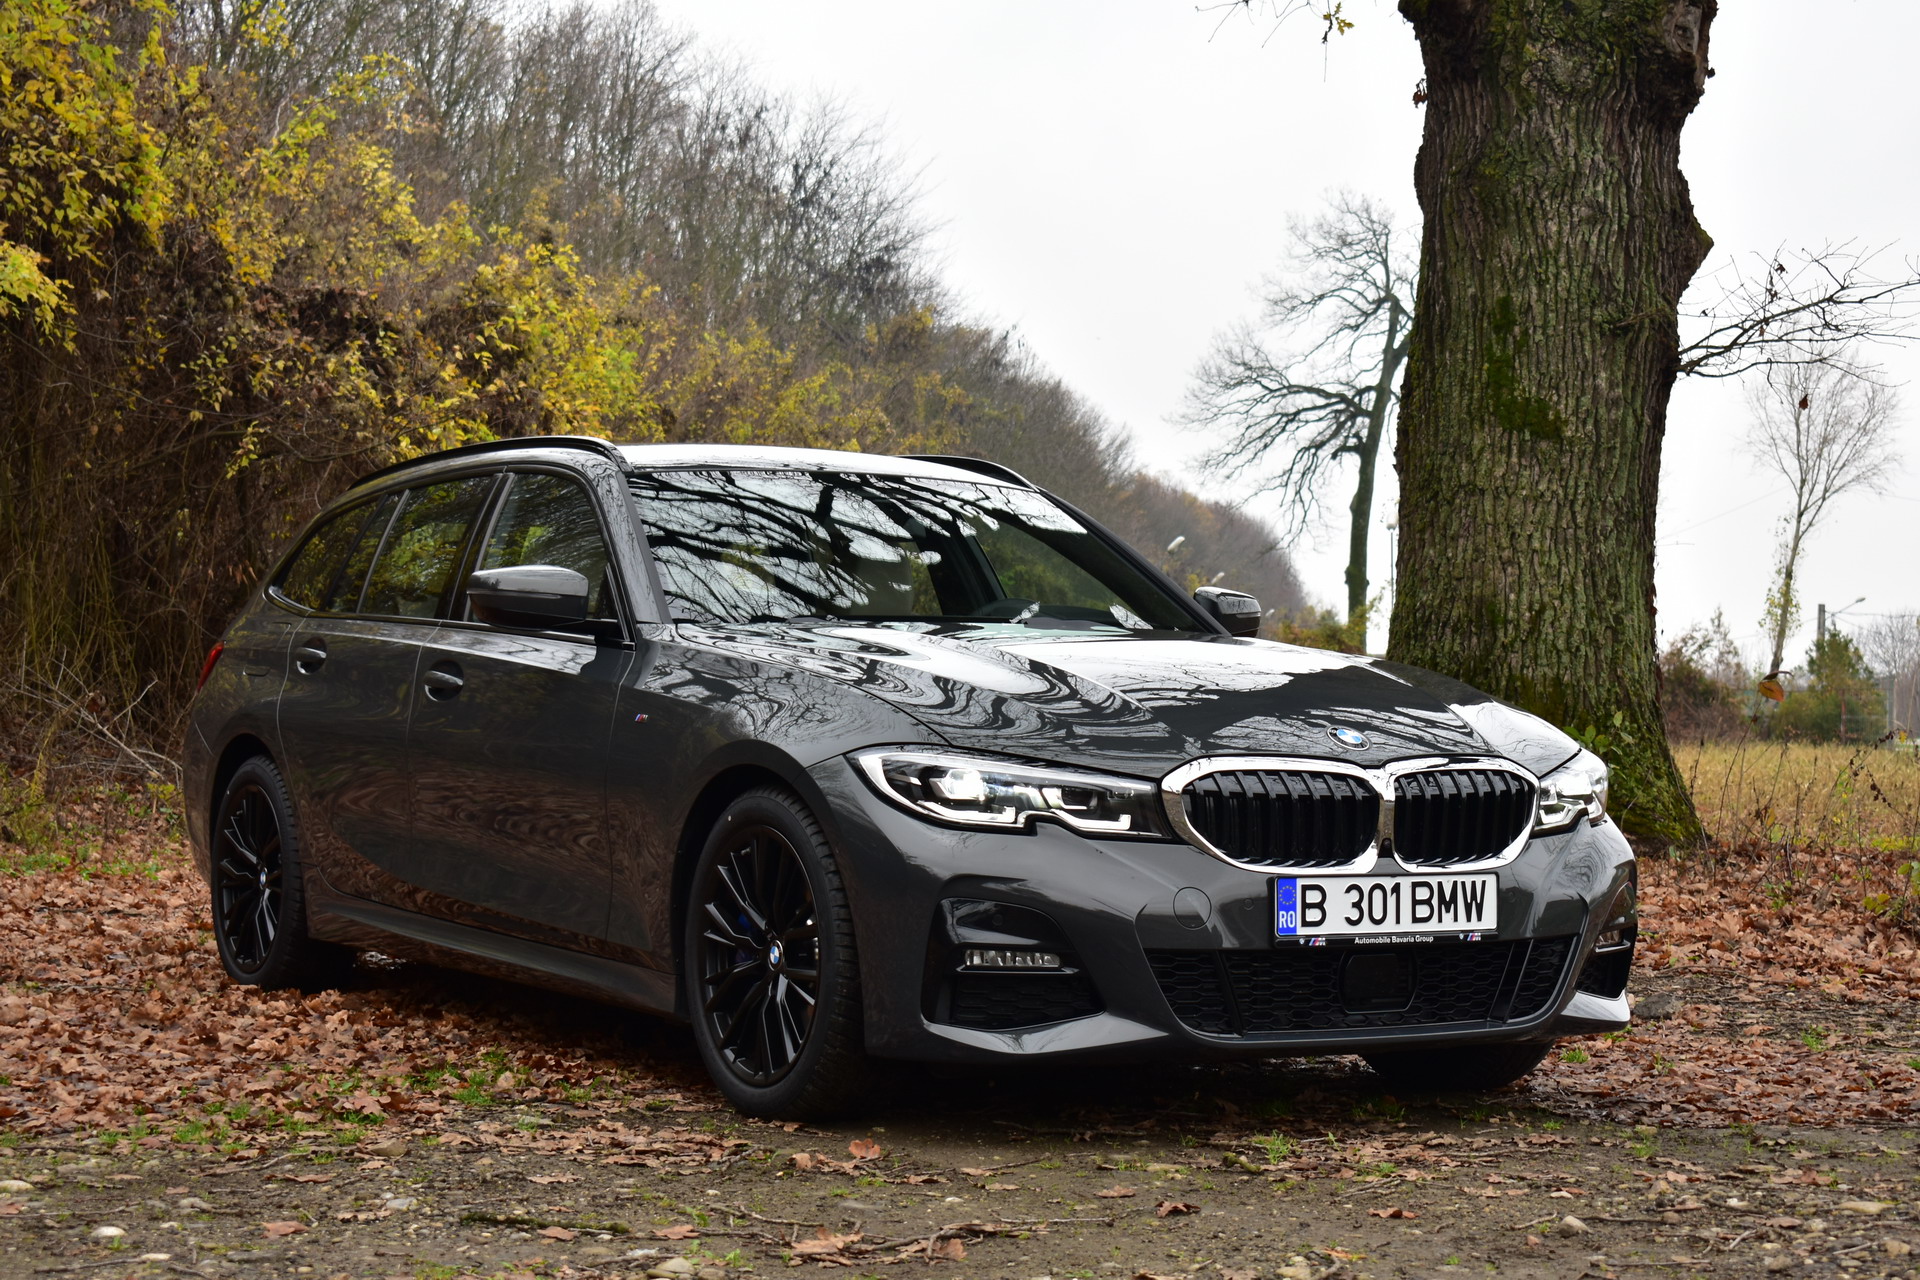 TEST DRIVE: BMW 3 Series Touring (G21) - The perfect everyday